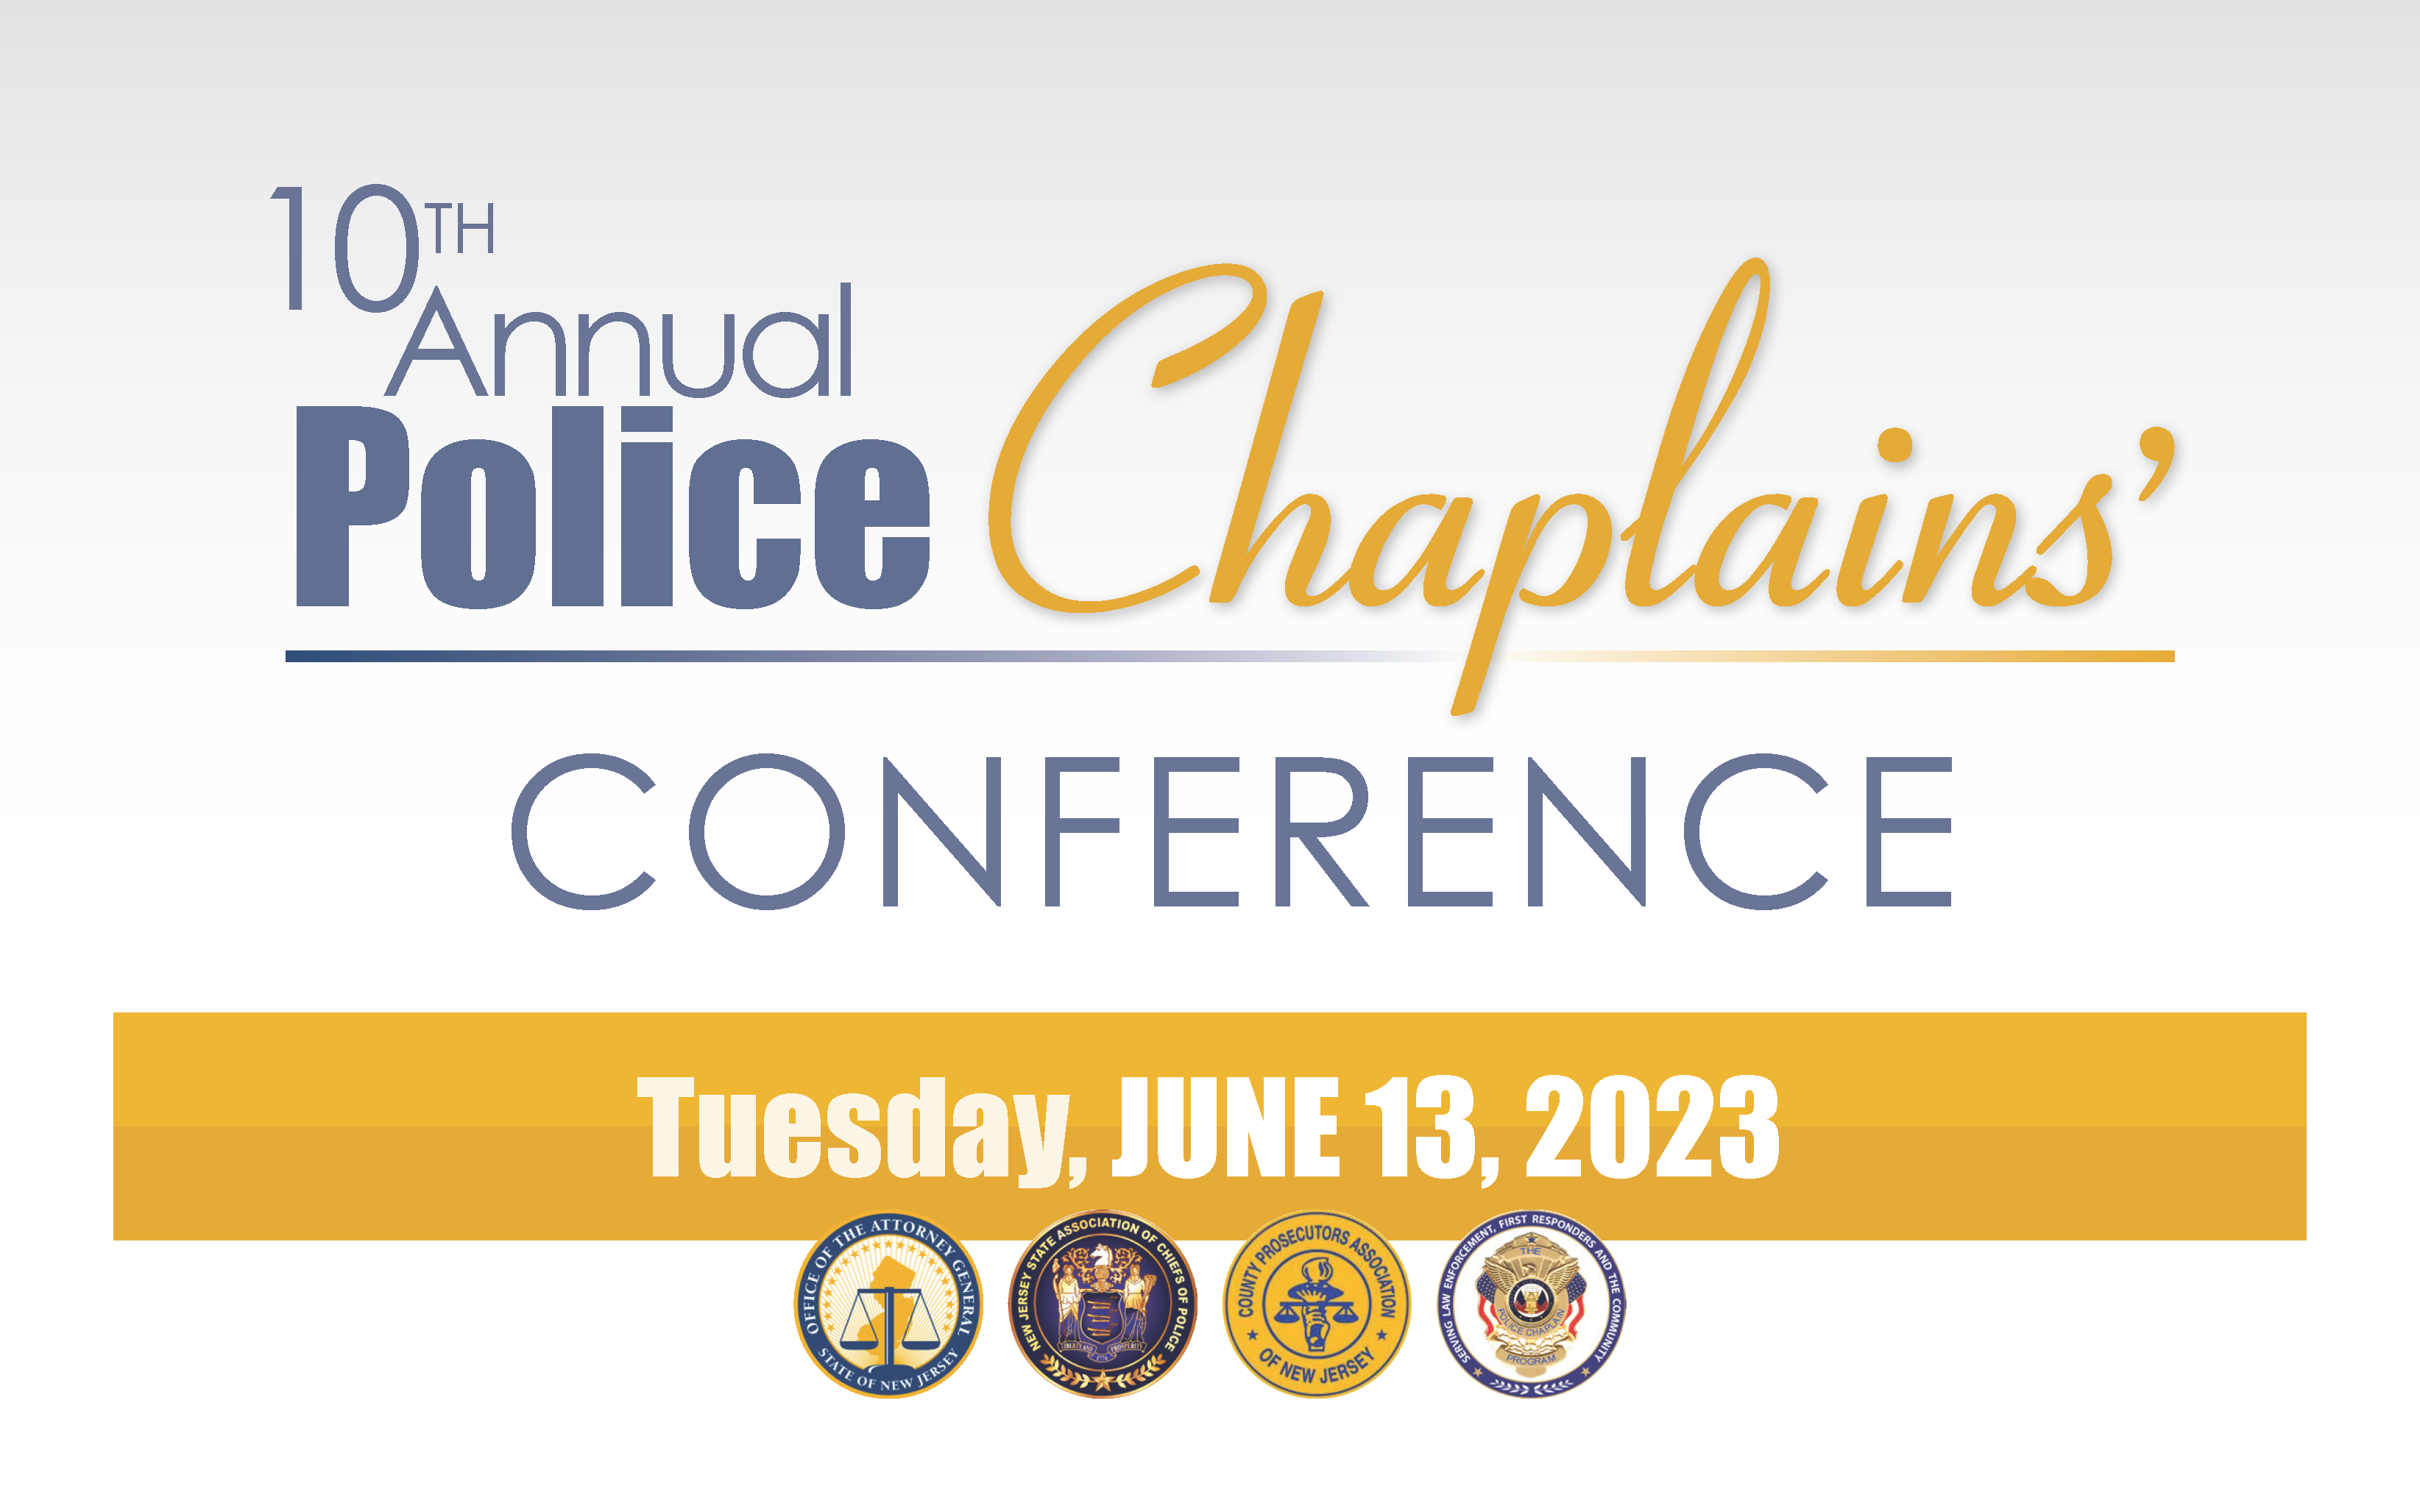 10th Annual Police Chaplain's Conference